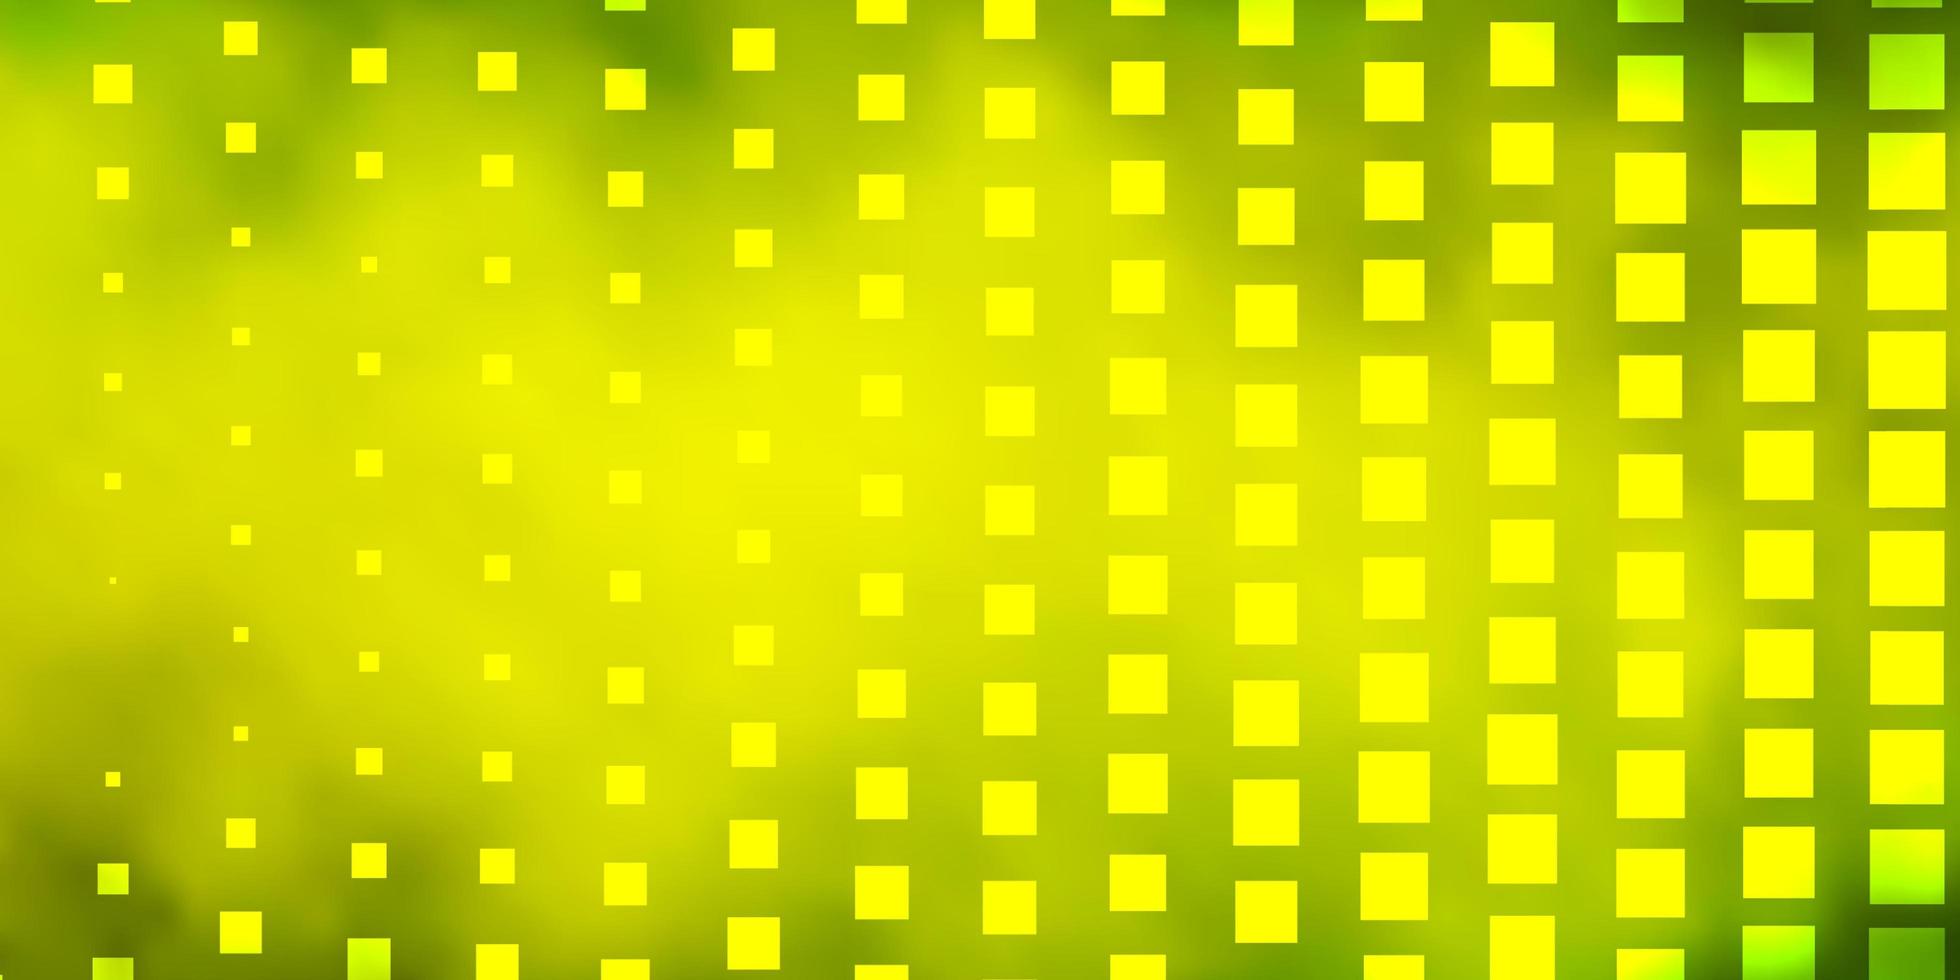 Light Green Yellow vector texture in rectangular style Rectangles with colorful gradient on abstract background Template for cellphones